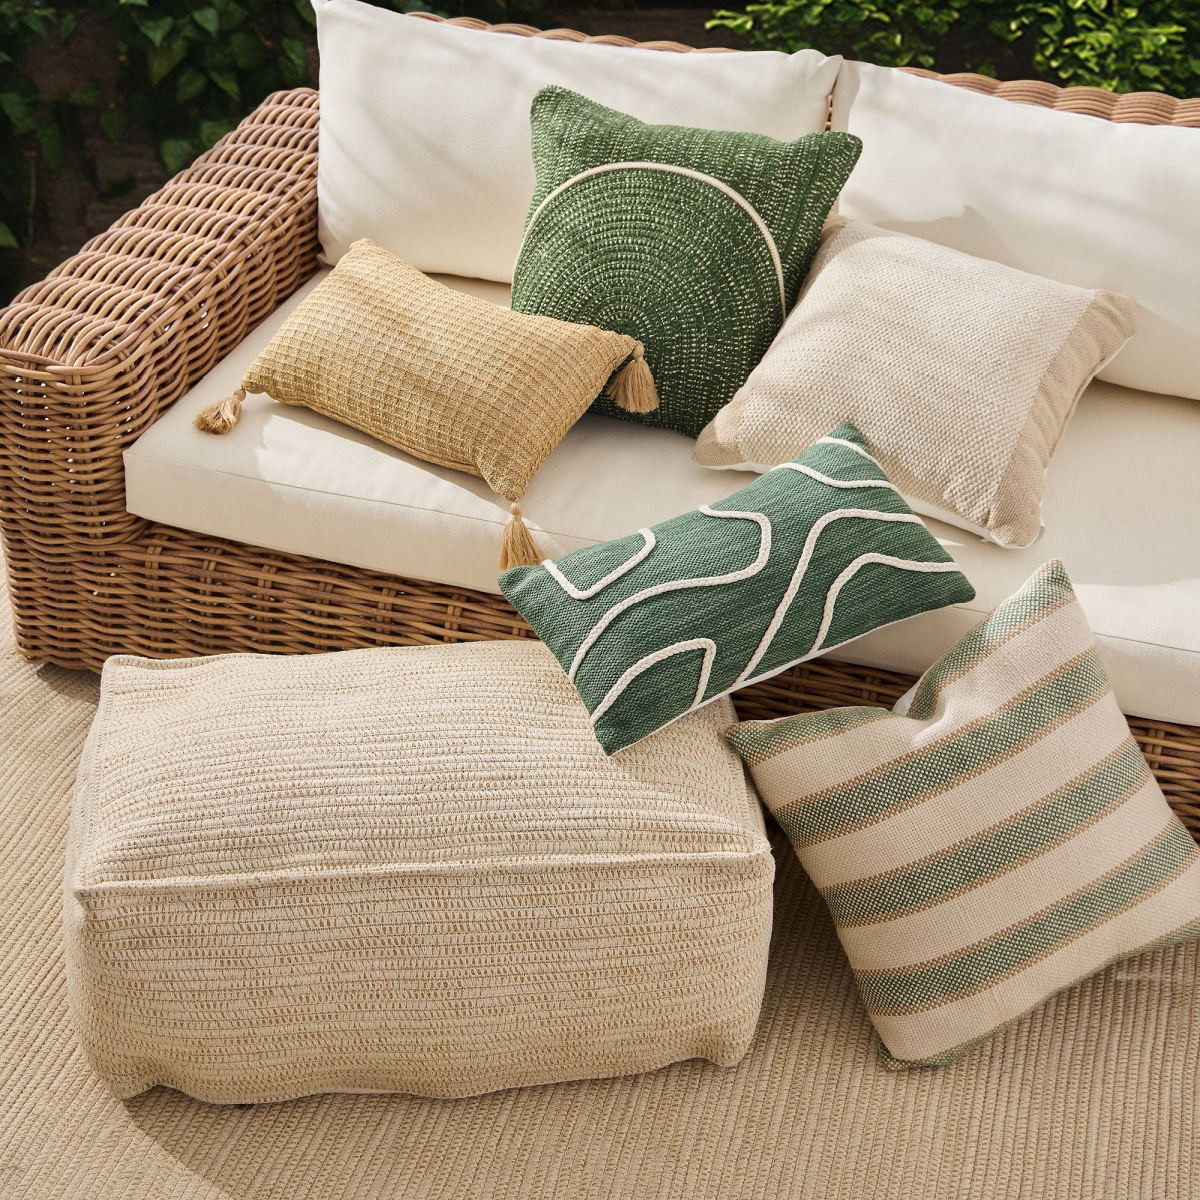 West Elm outdoor pillows in green and natural theme.